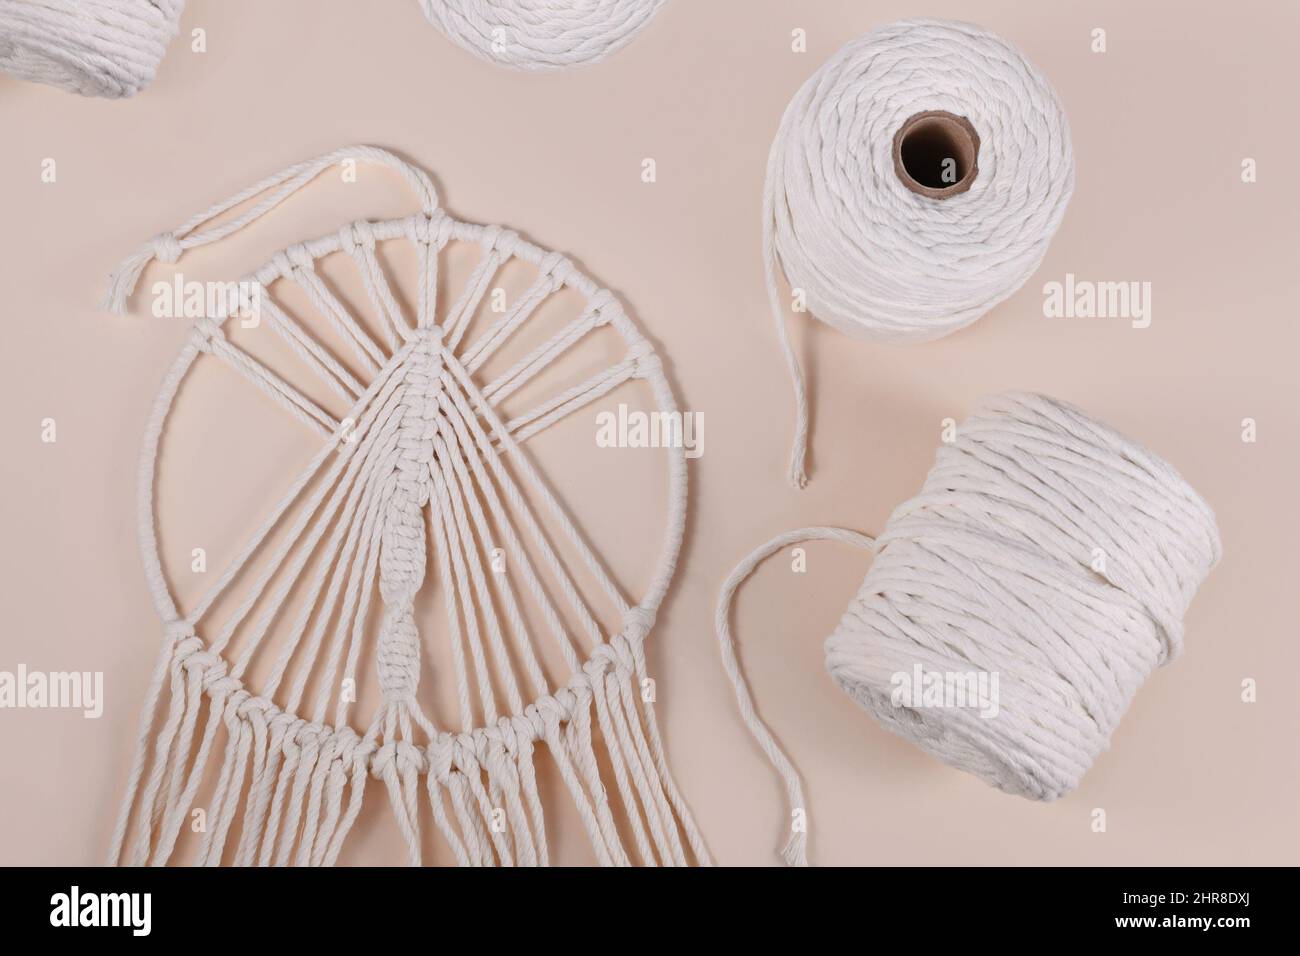 Cotton macrame cord and finished wall hanging object on beige background Stock Photo